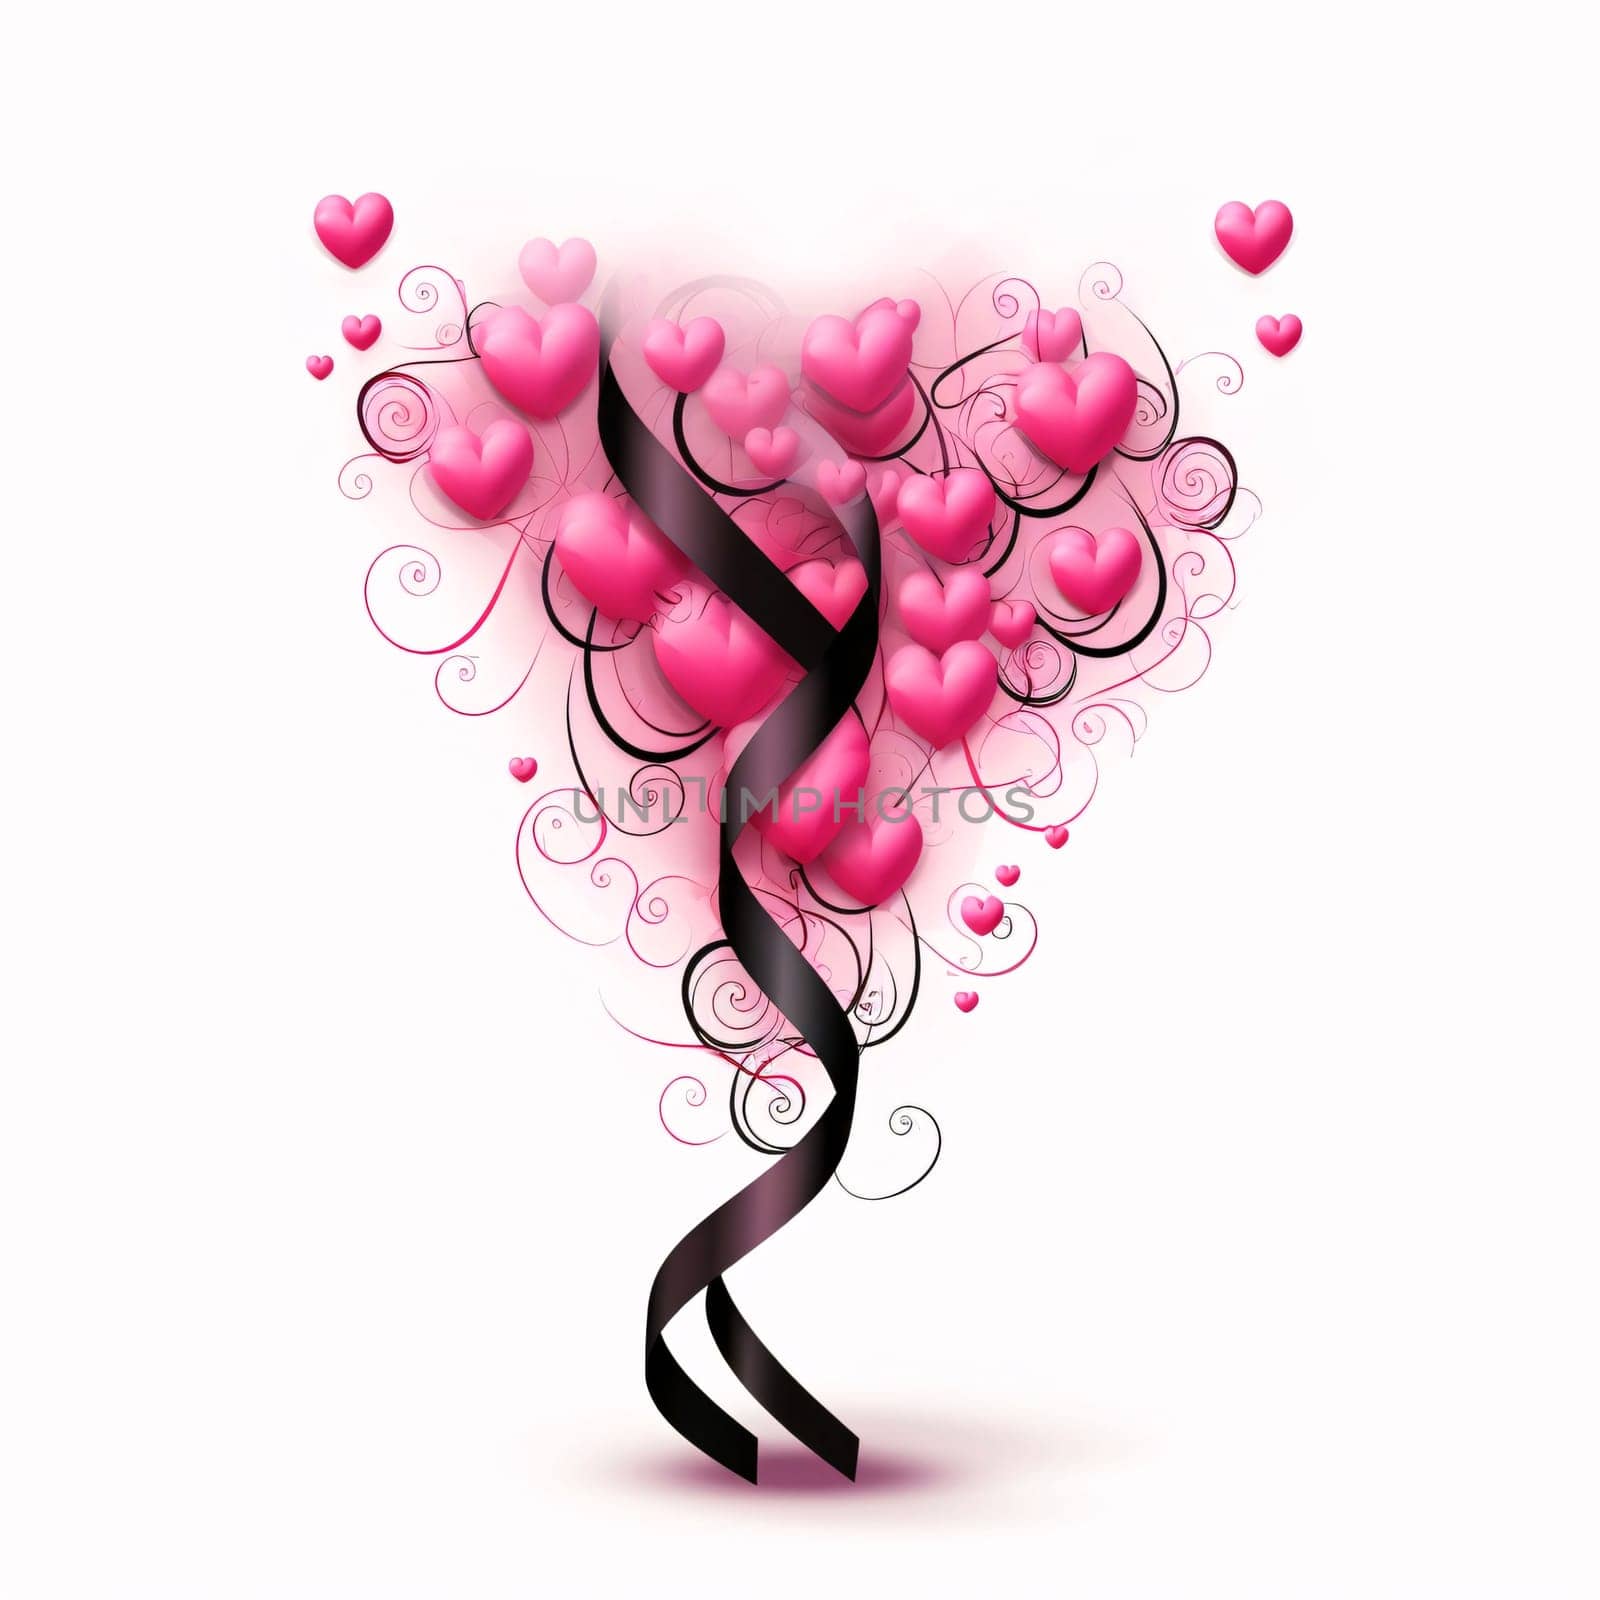 Pink hearts entwined with black ribbon, white background. Heart as a symbol of affection and love. The time of falling in love and love.